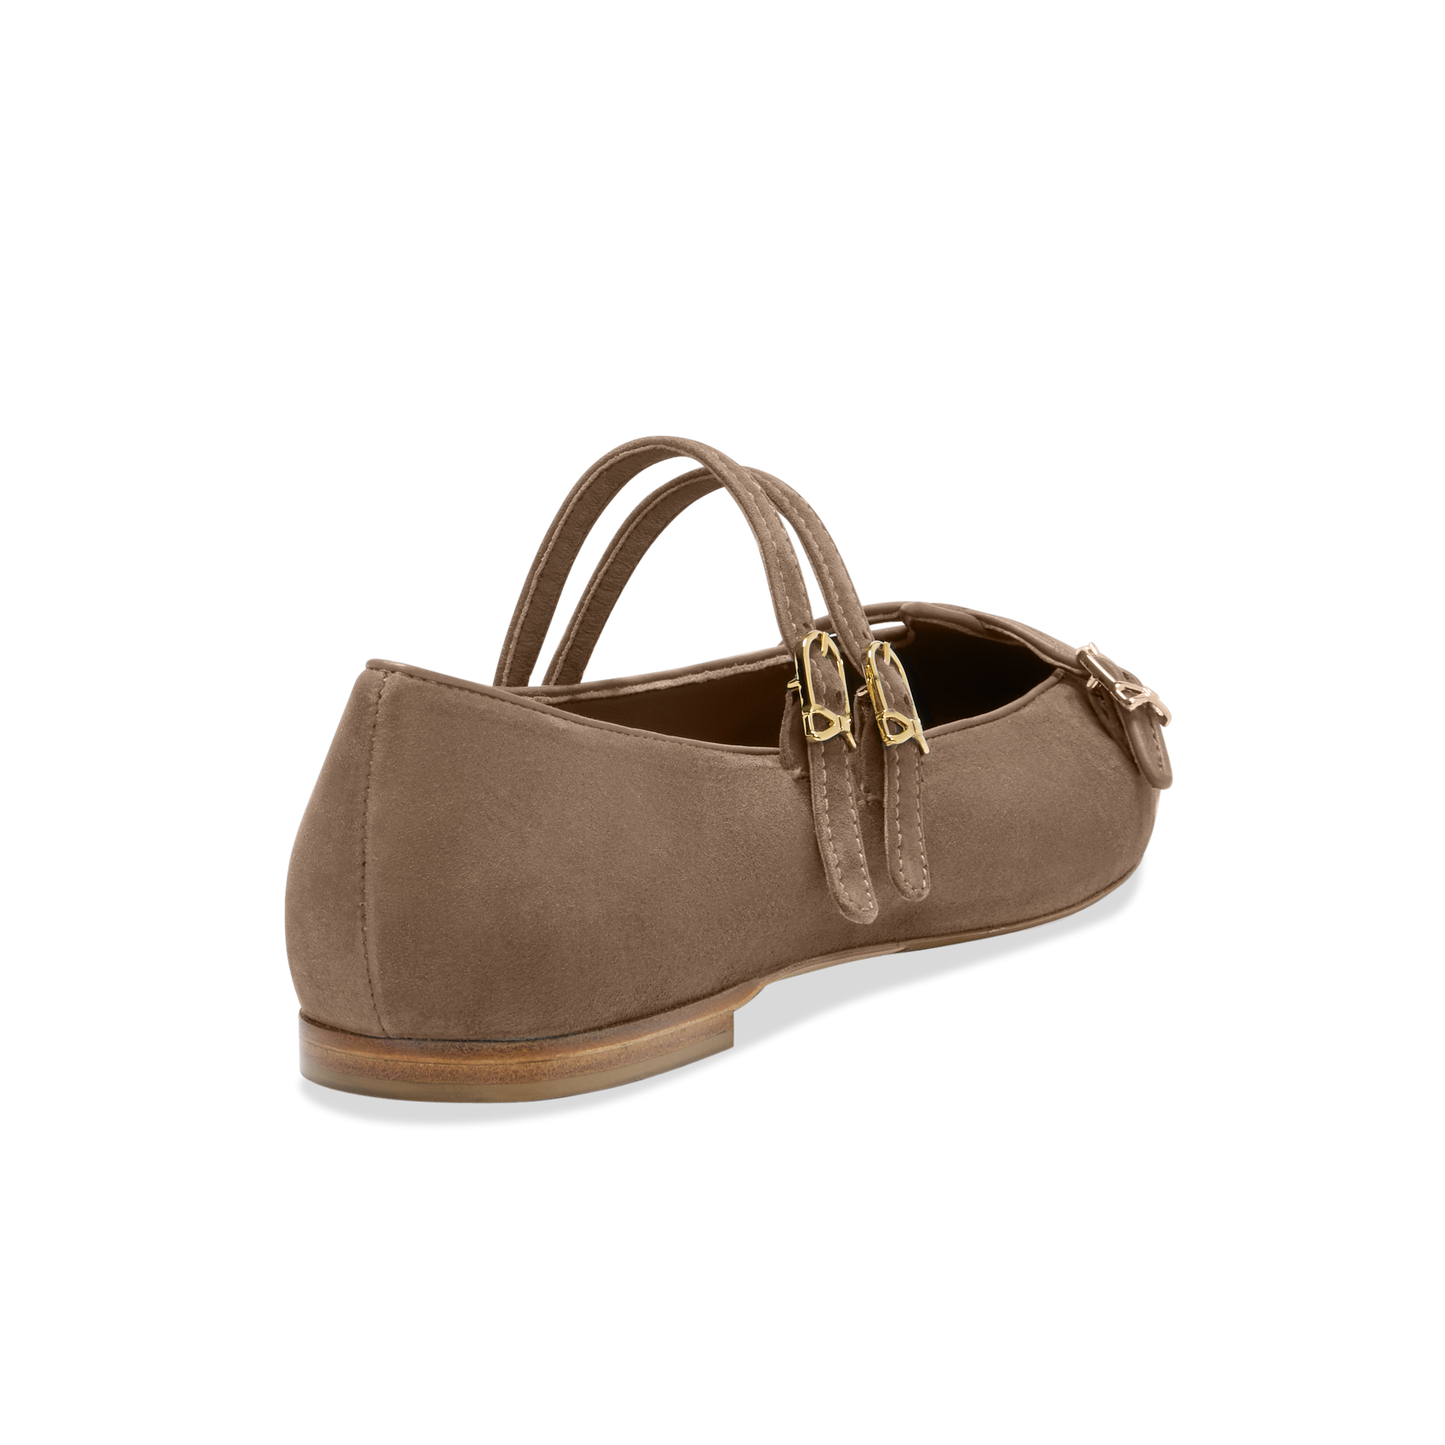 Mary Gail Mary Jane in Taupe Suede